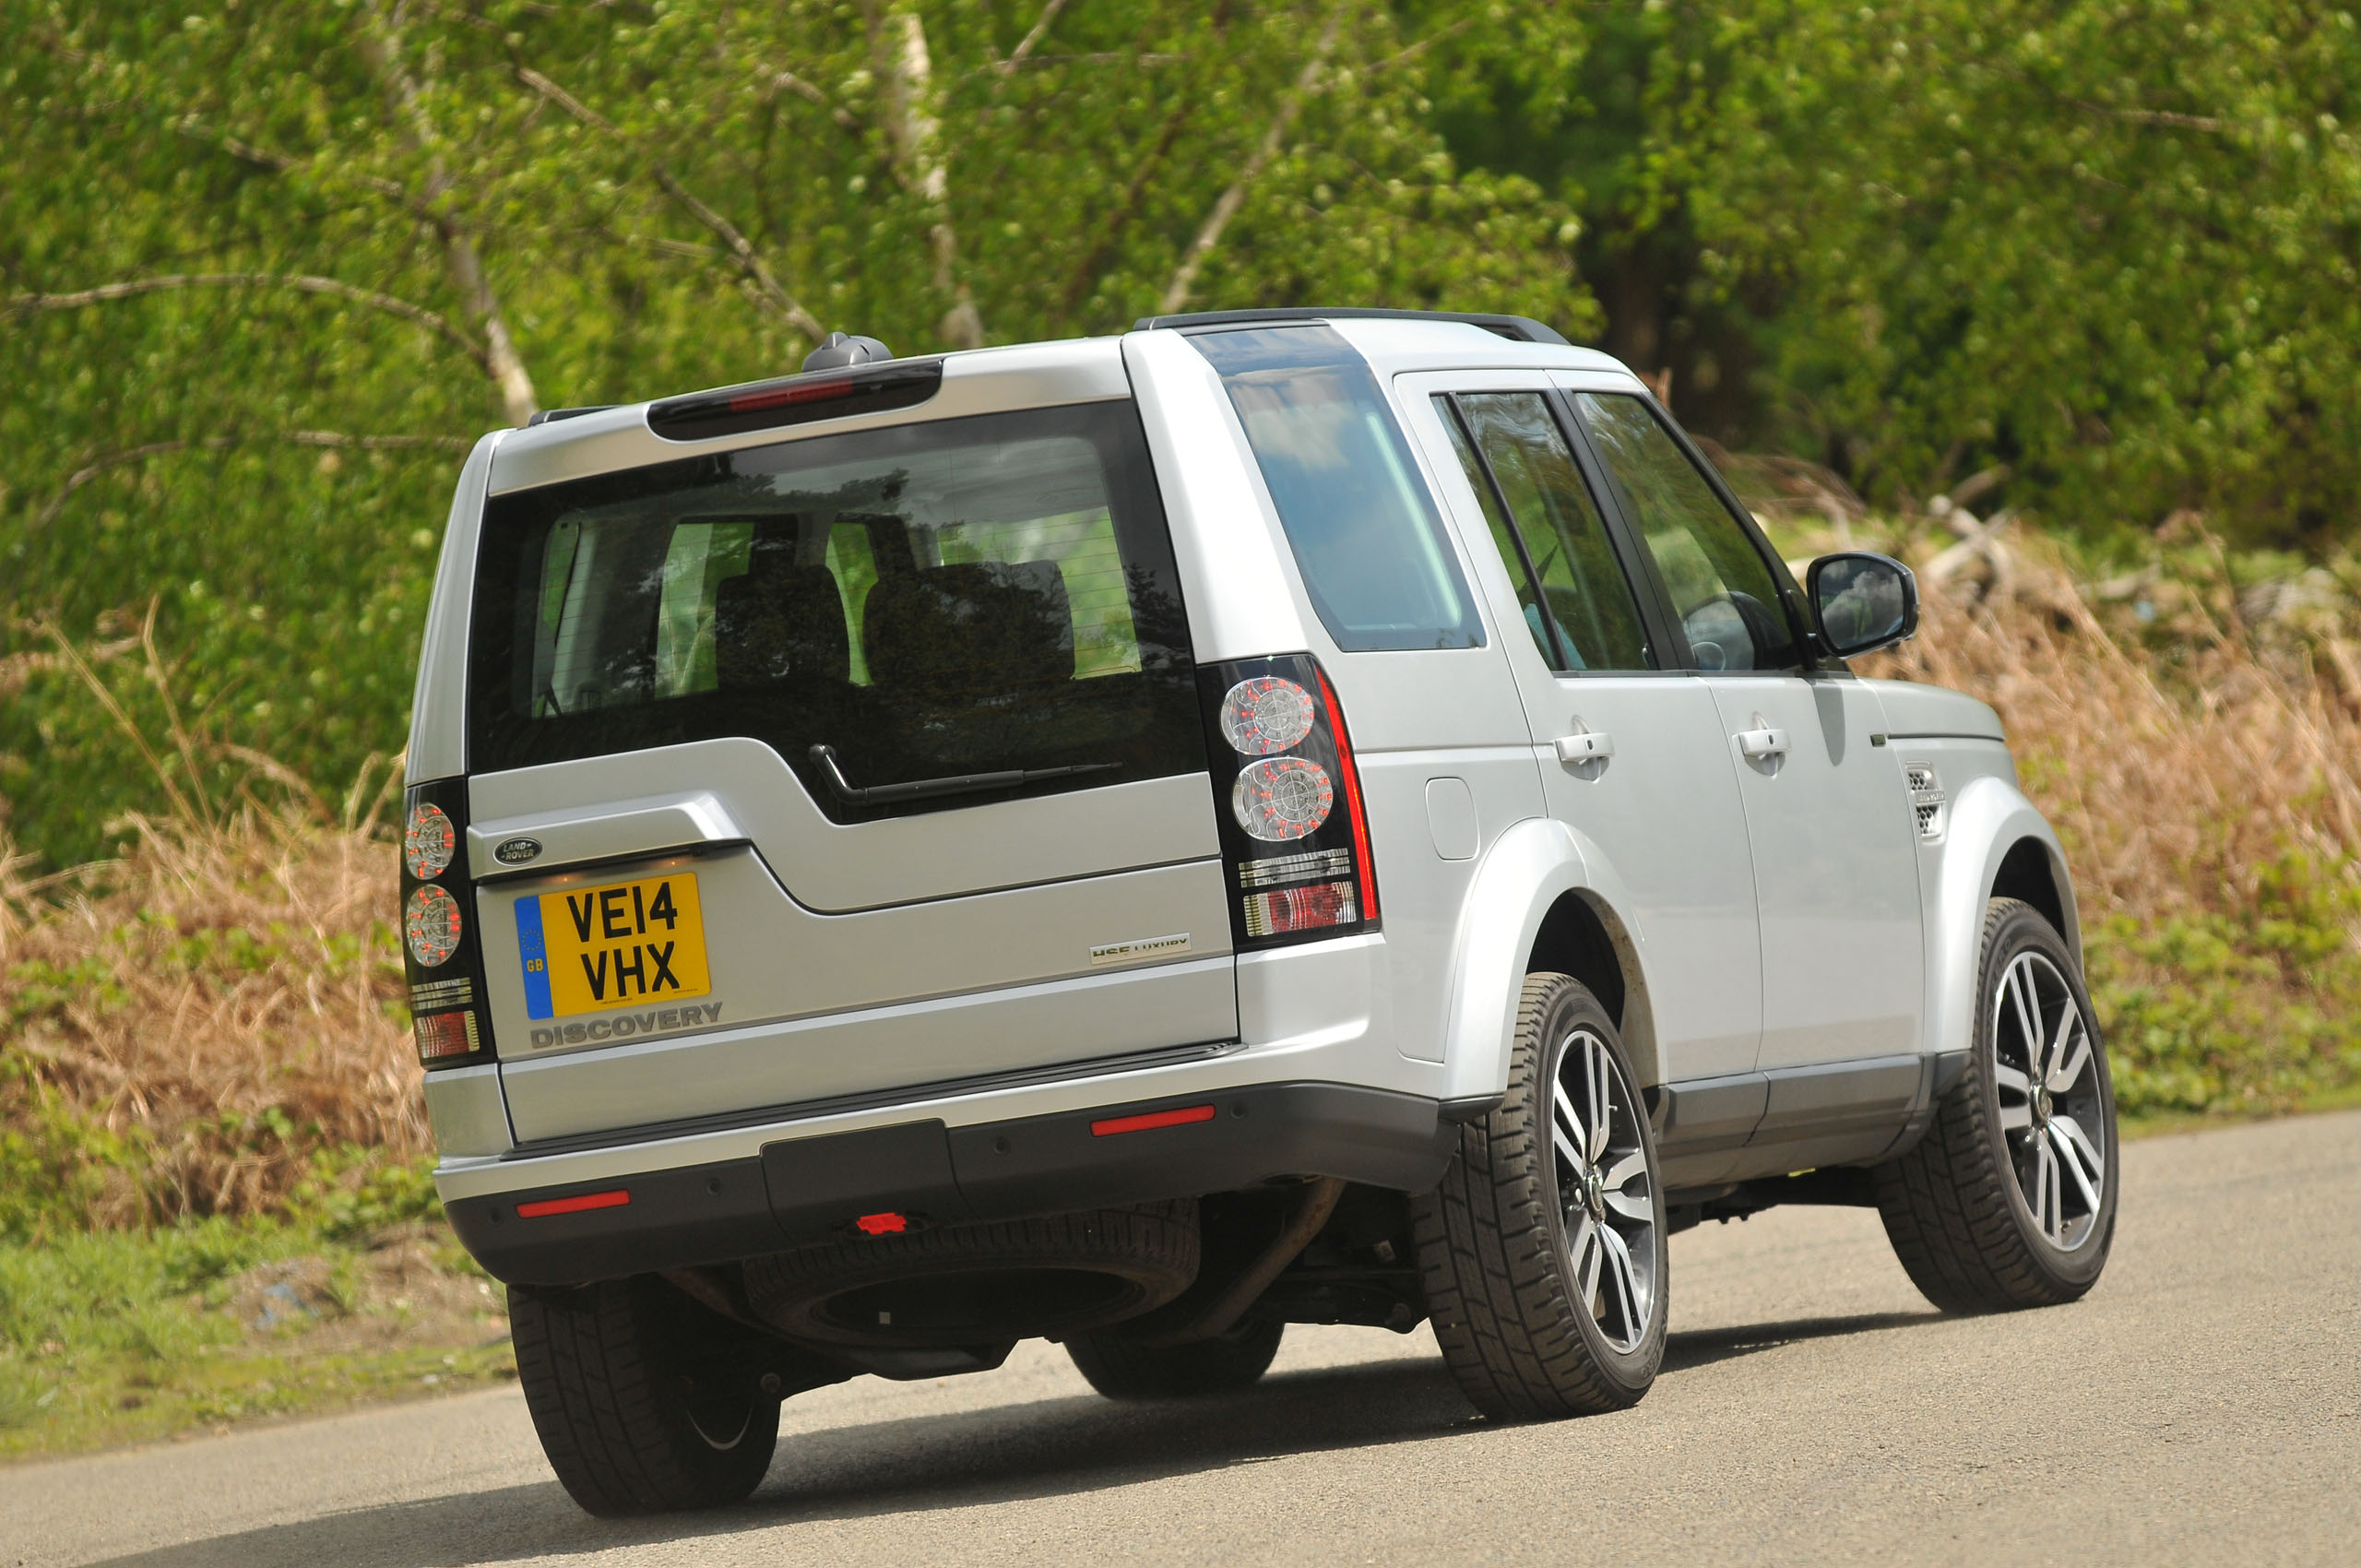 Land Rover Discovery rear cornering